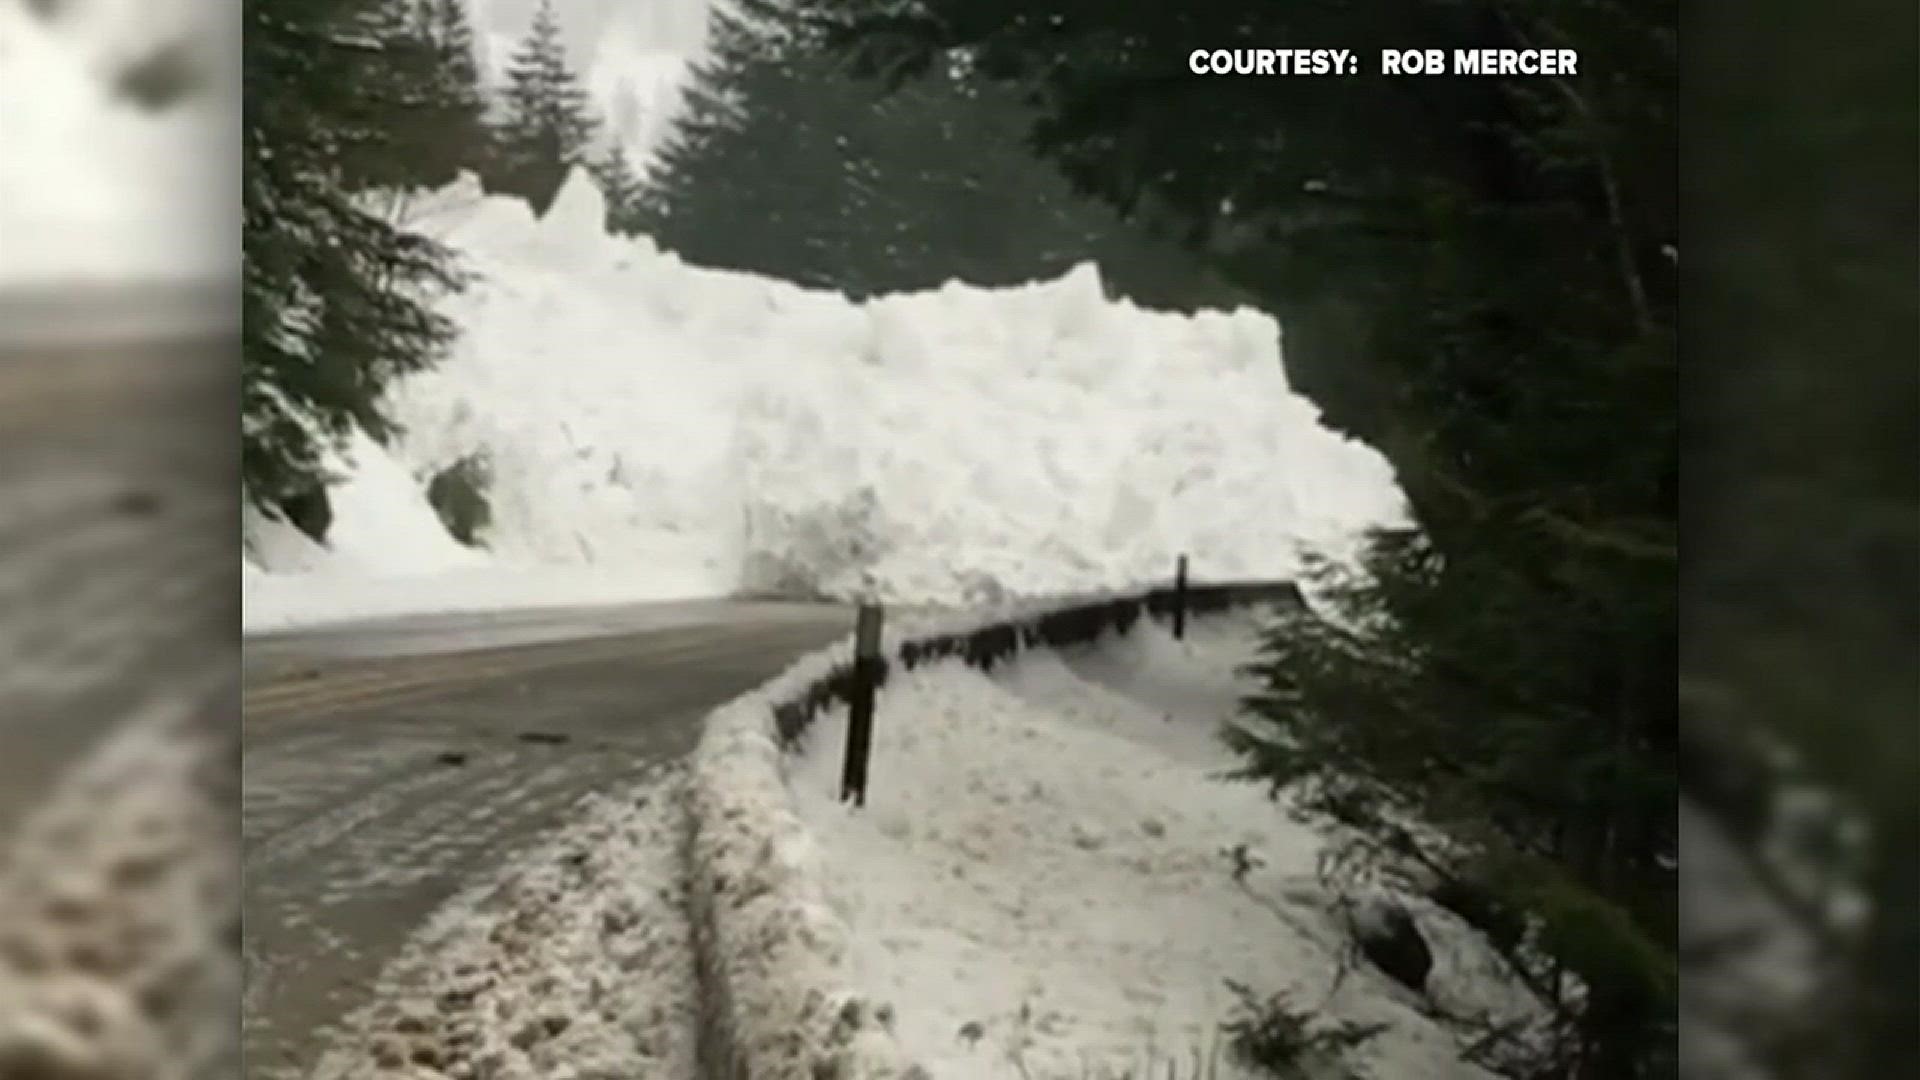 Rob Mercer captured incredible footage of an avalanche in motion on Washington's North Cascades Highway